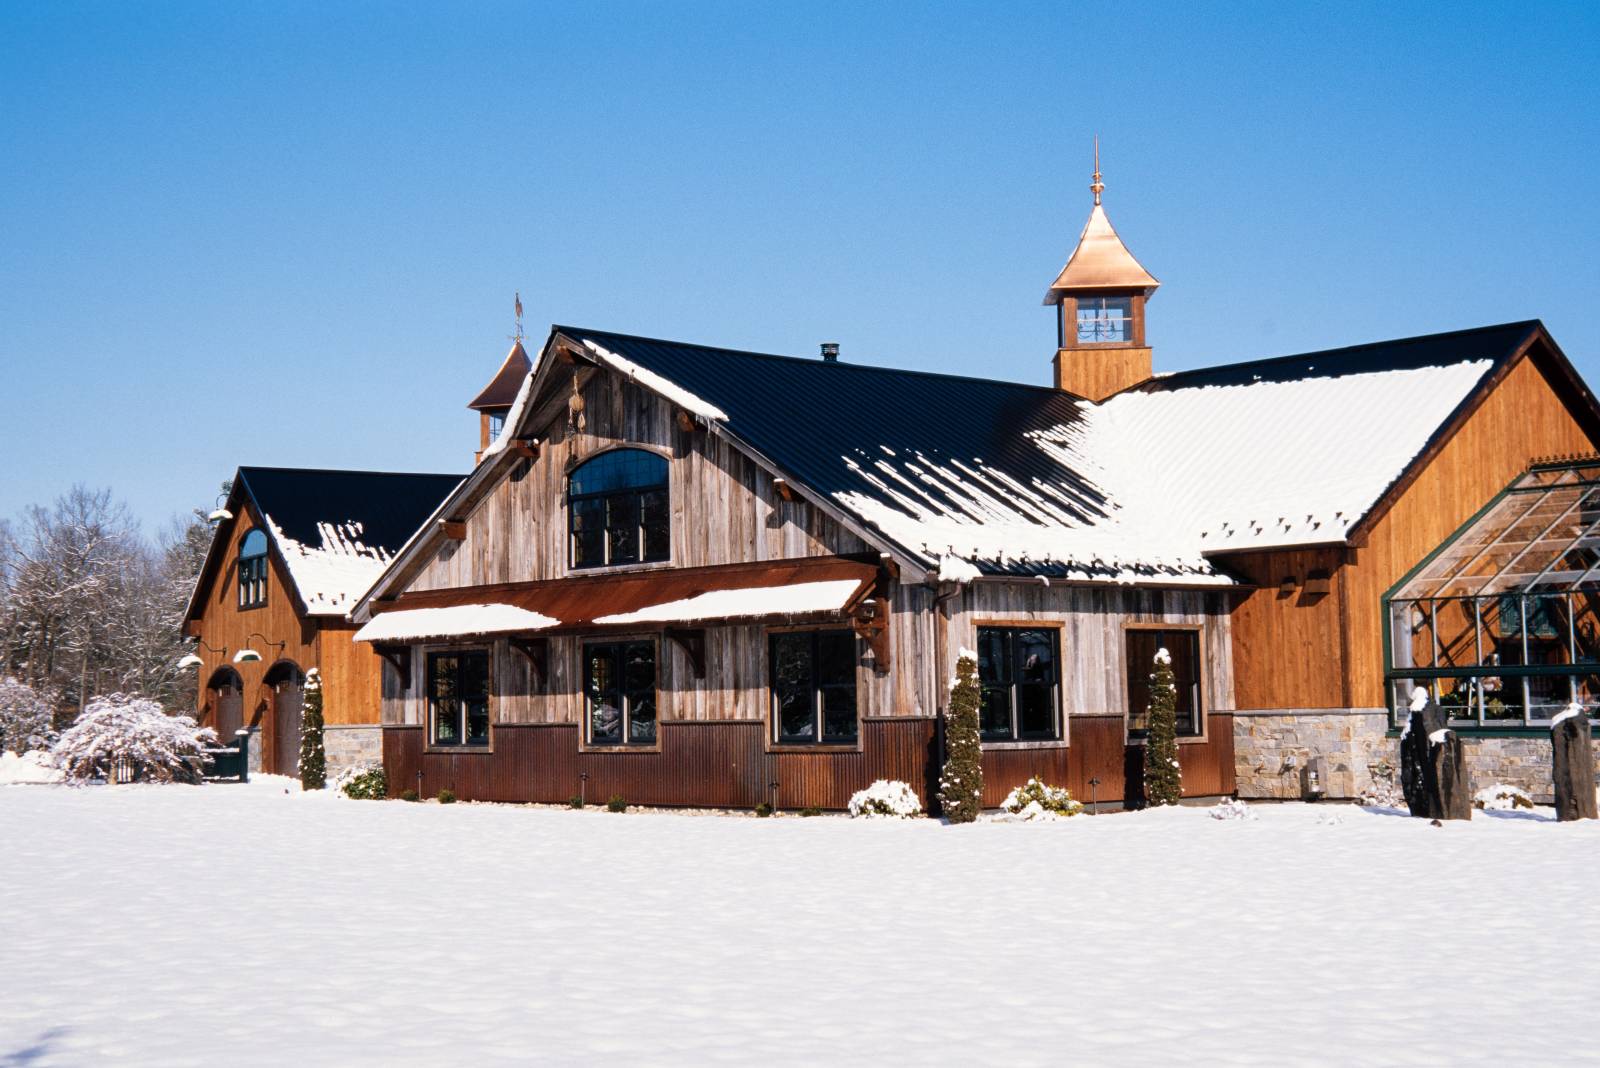 Party Barn in the Snow • Exterior Features Include: Reclaimed Barn Siding • Rusty Metal Accents • Timber Frame Eyebrow Roof & Accents